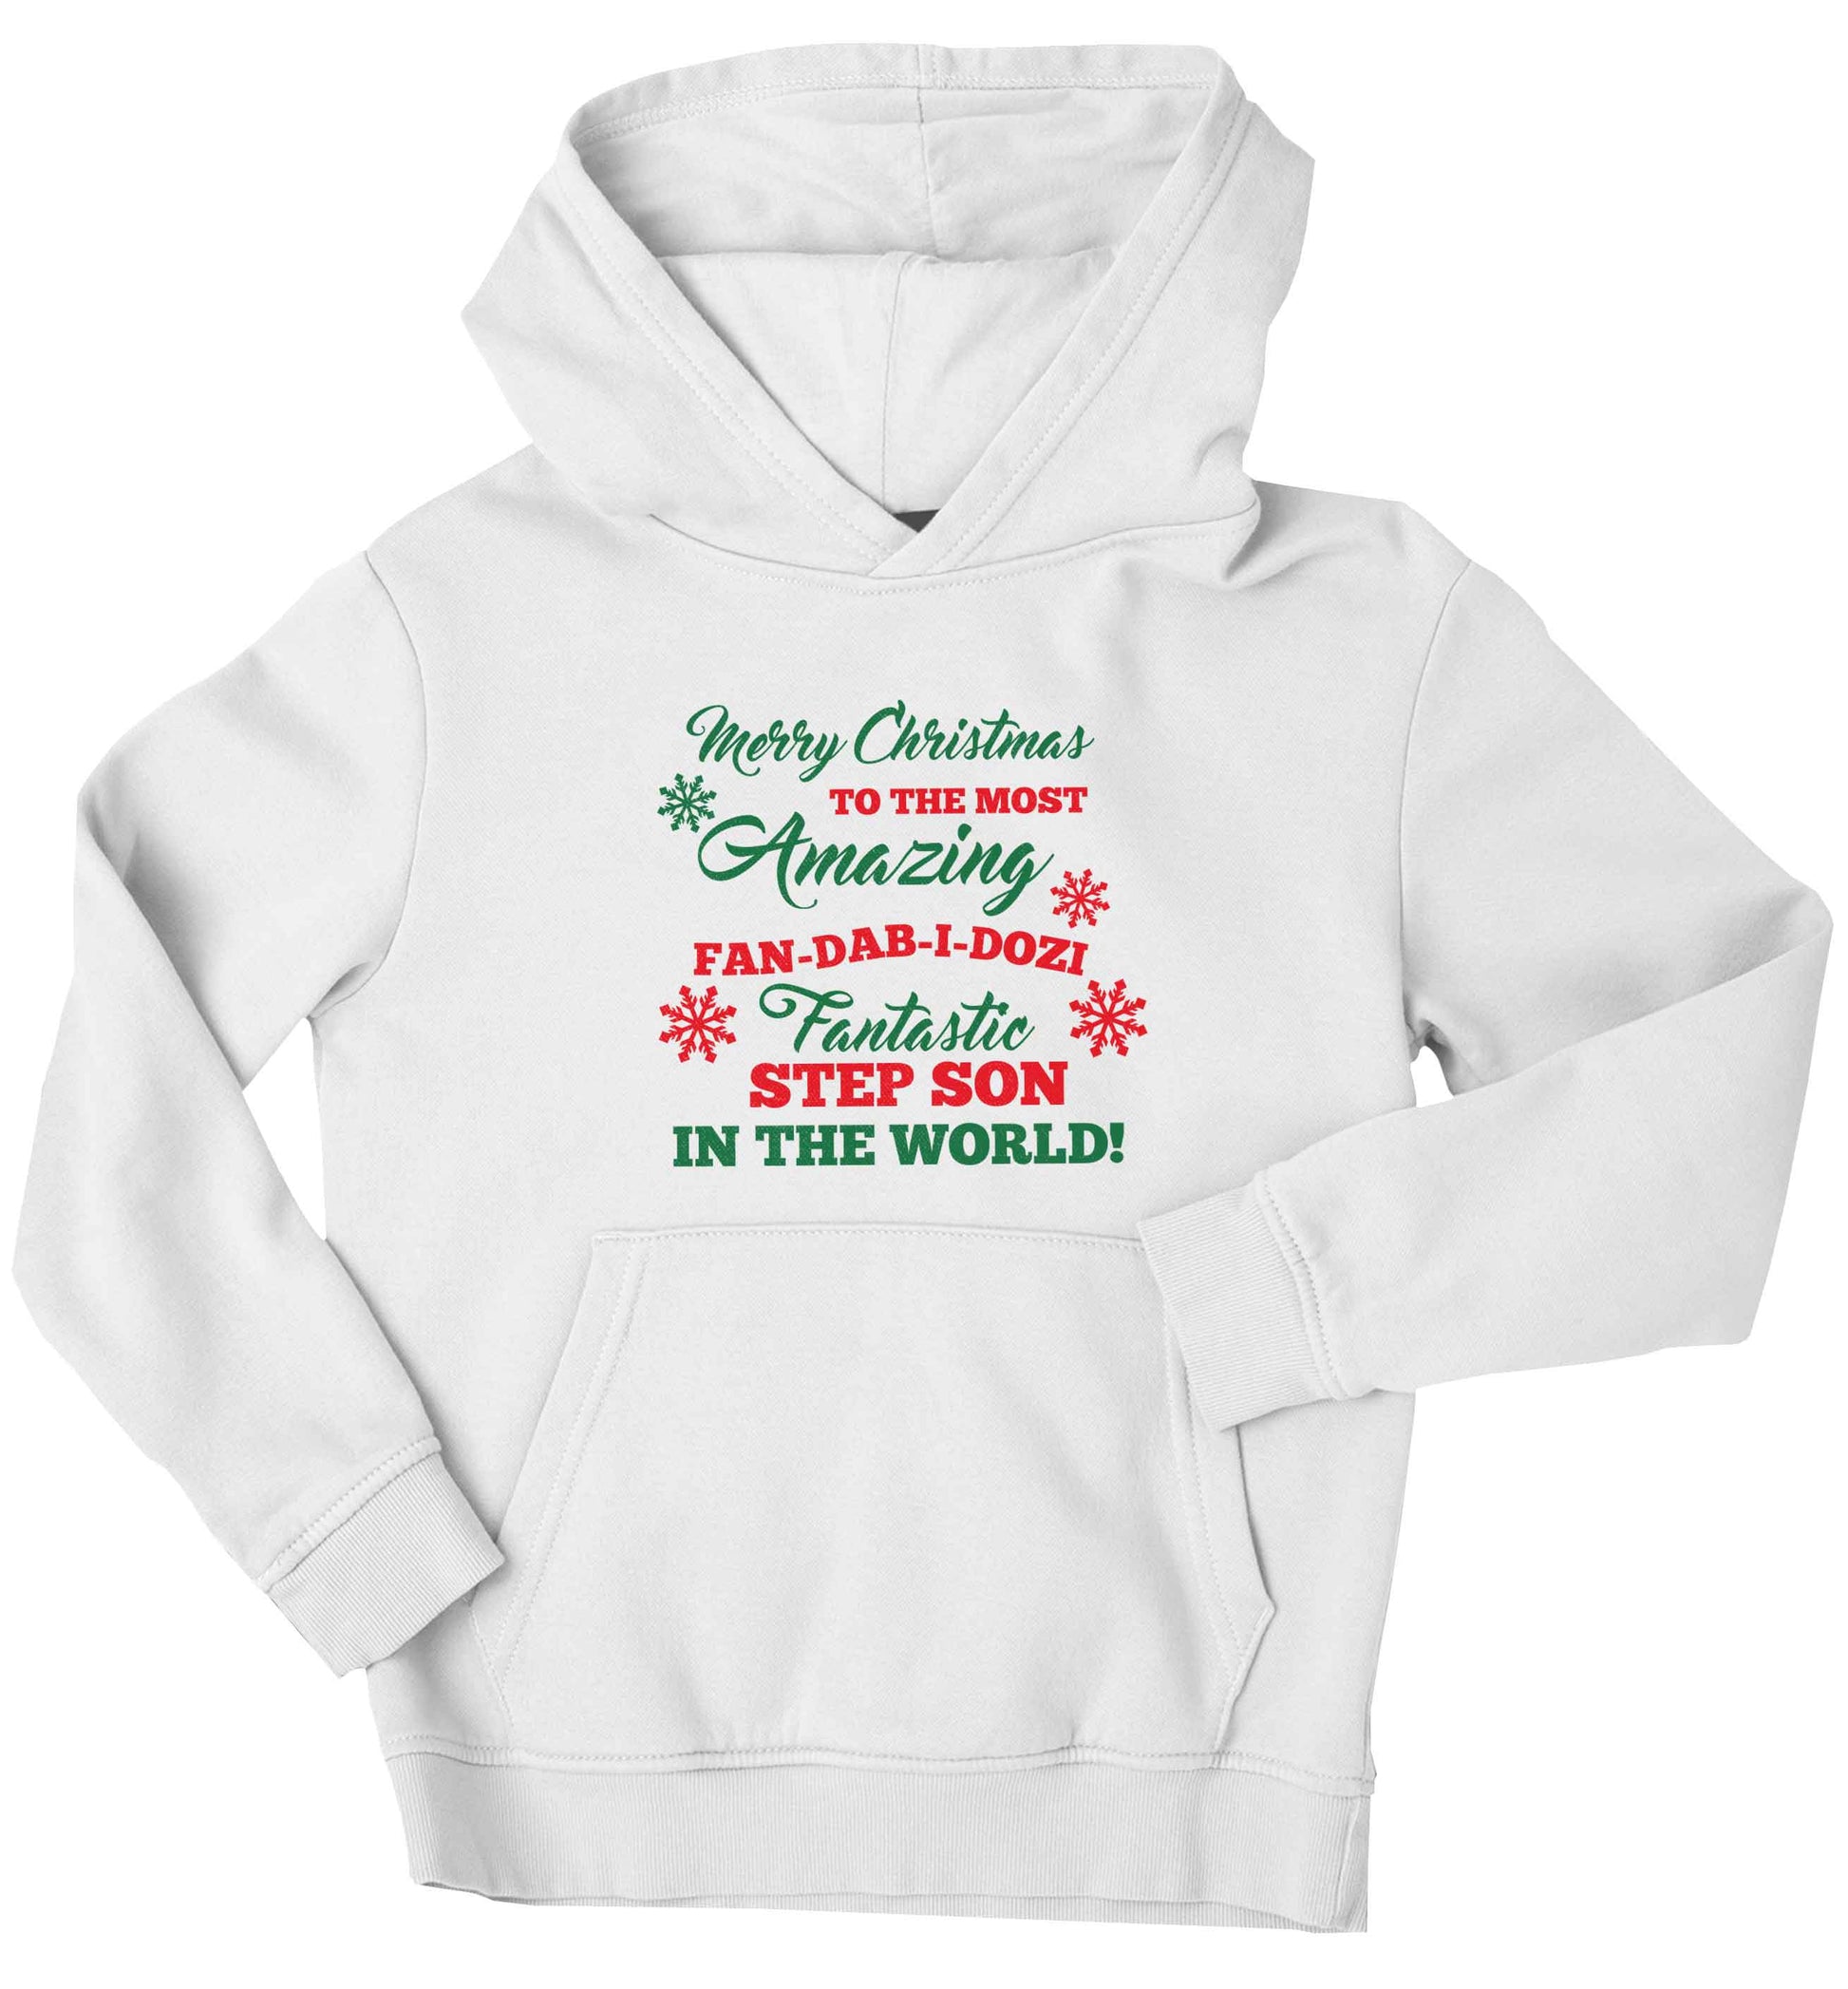 Merry Christmas to the most amazing fan-dab-i-dozi fantasic Step Son in the world children's white hoodie 12-13 Years